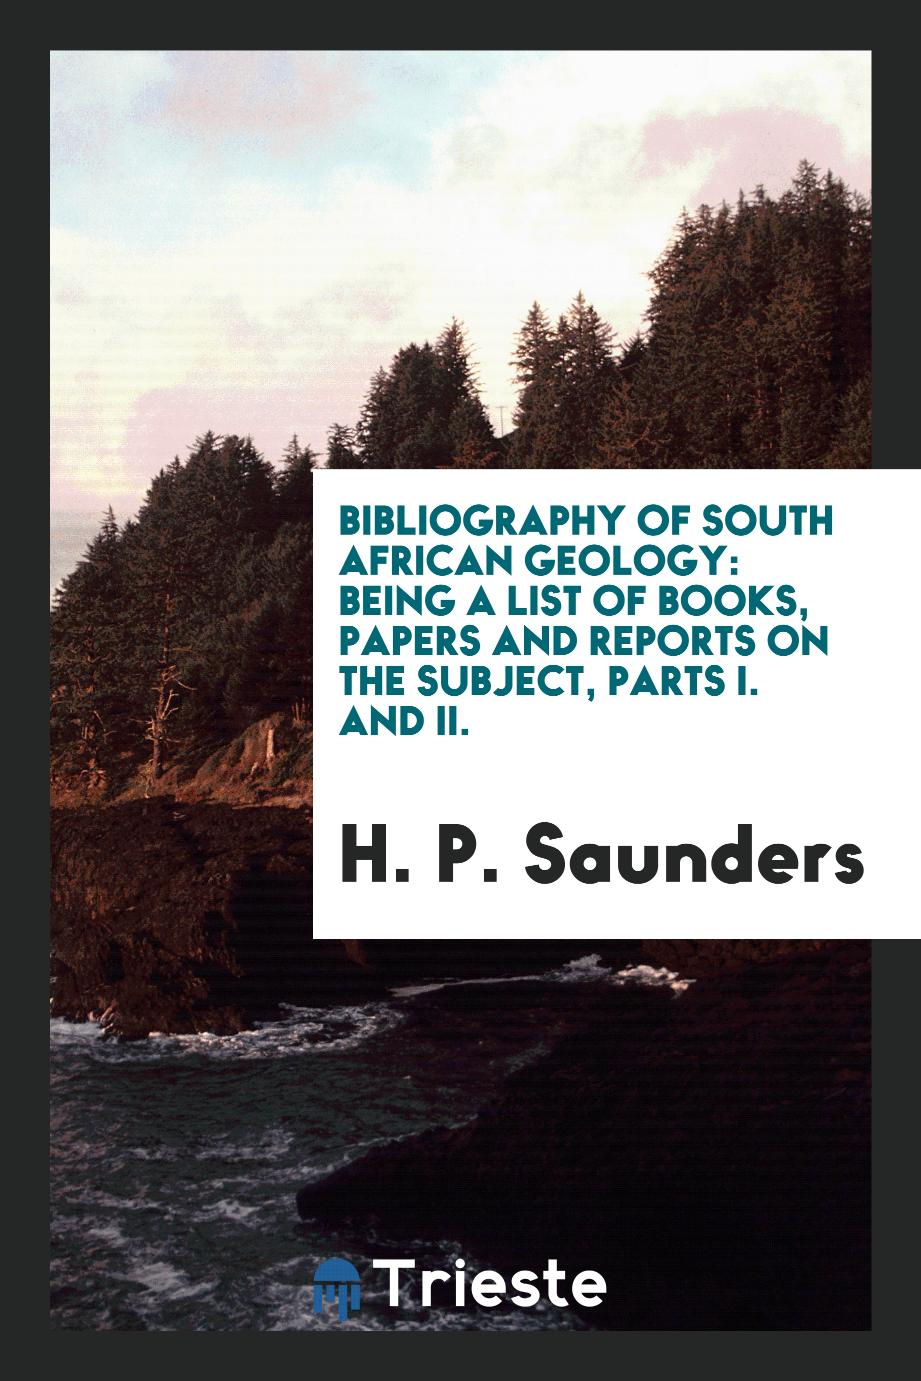 Bibliography of South African Geology: Being a List of Books, Papers and Reports on the Subject, Parts I. and II.